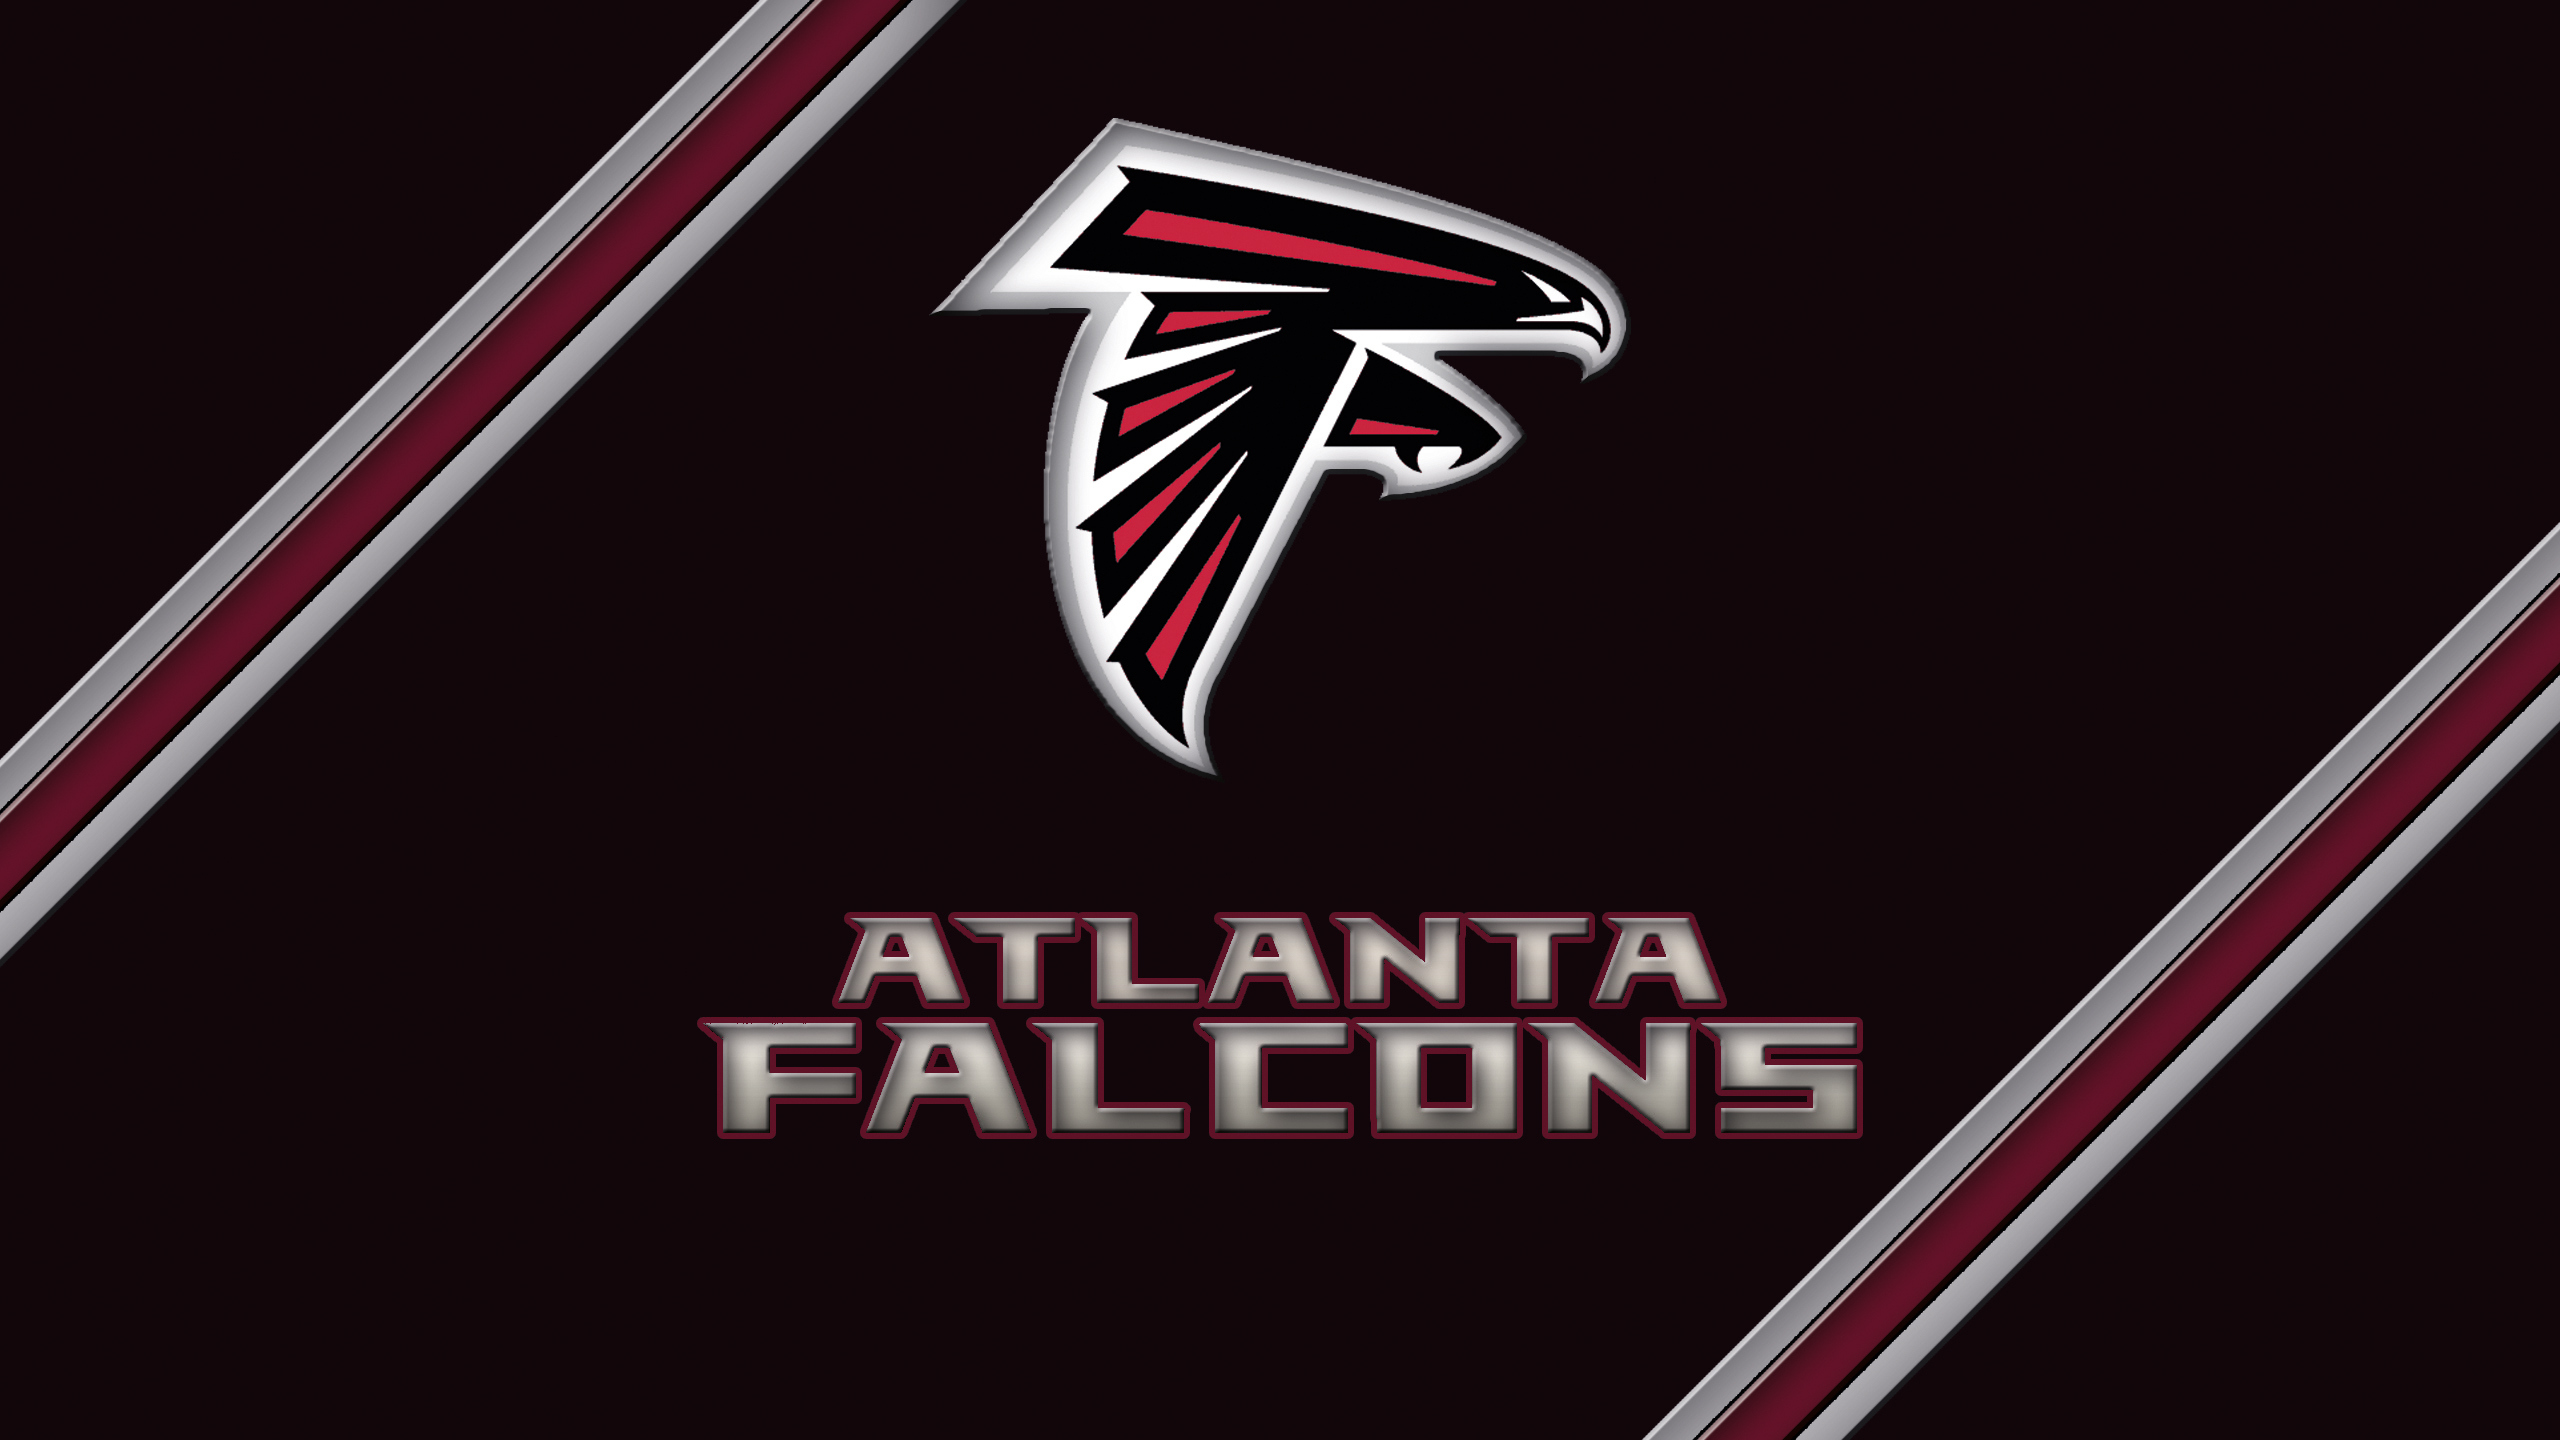 Atlanta Falcons: A Legacy of Grit and Determination